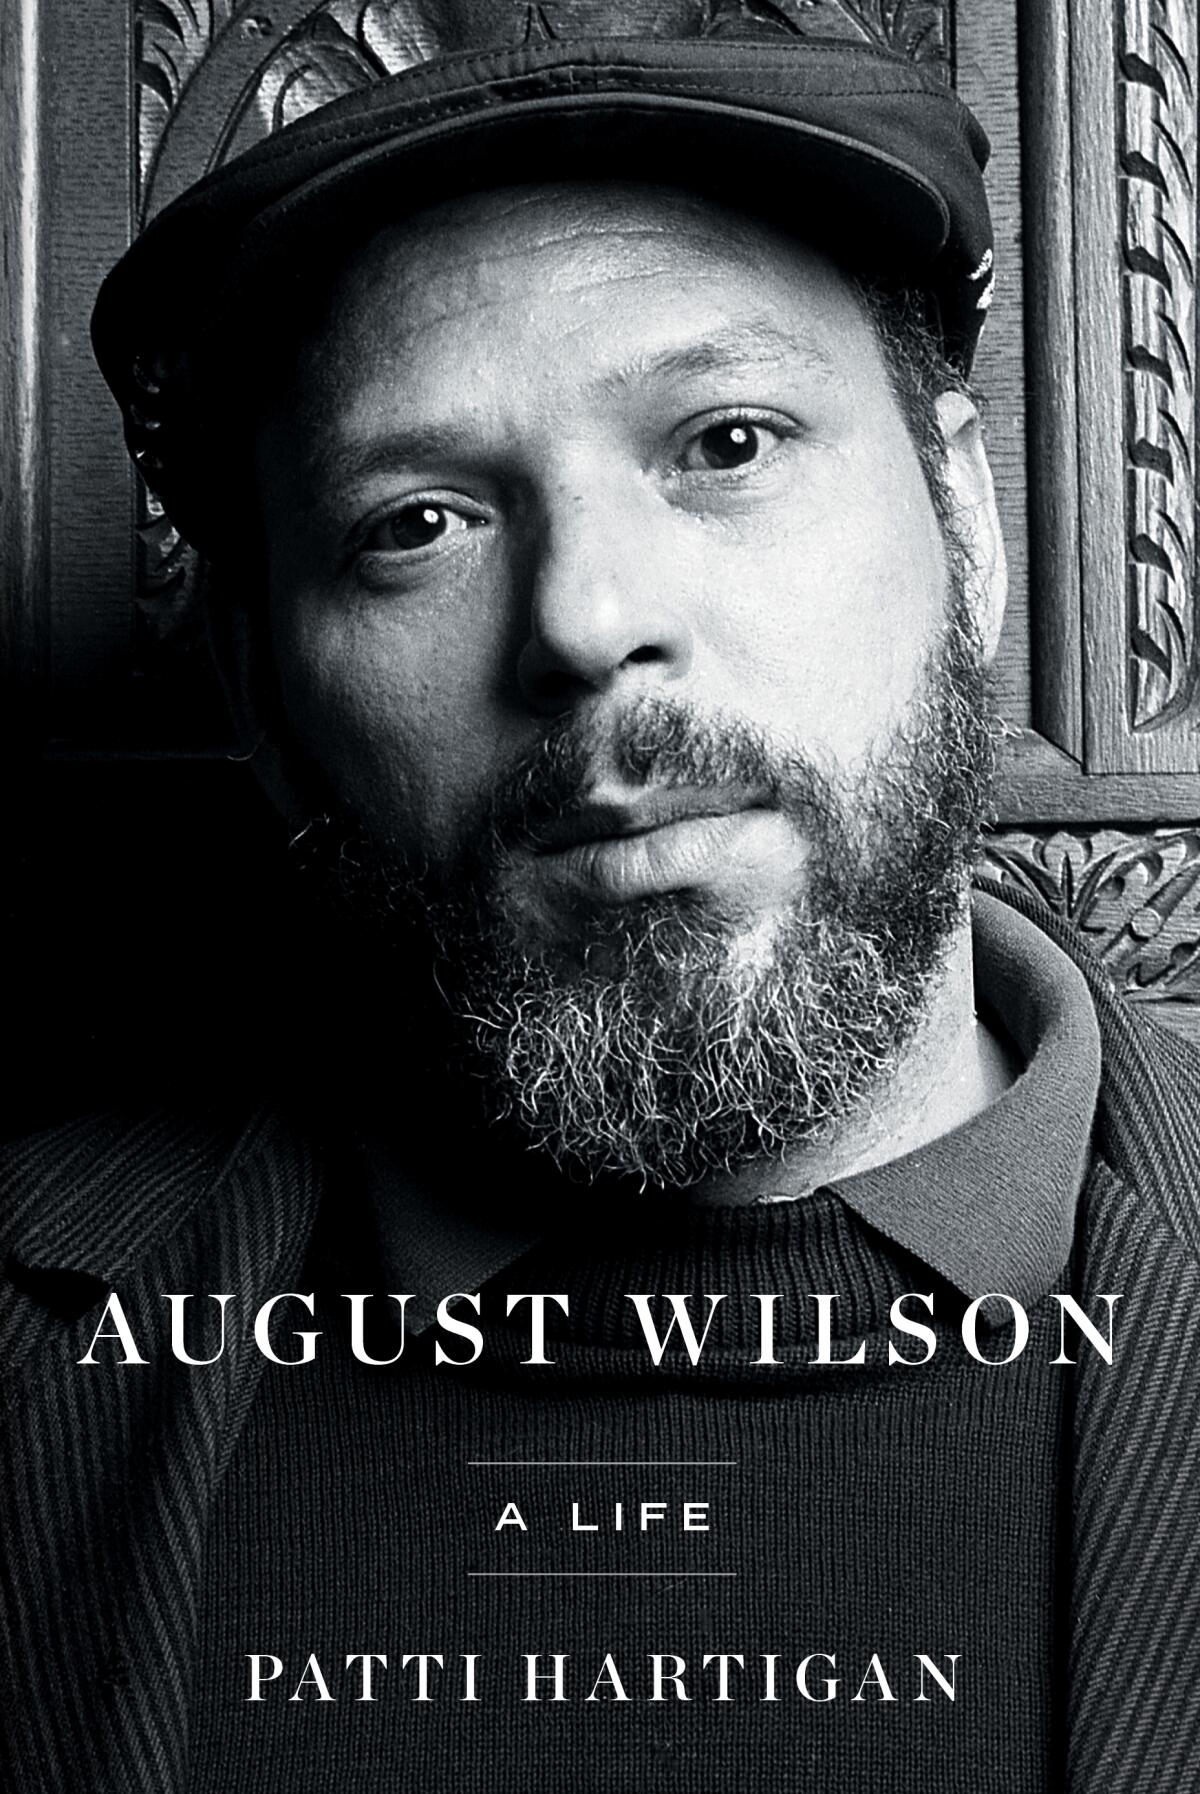 The cover of "August Wilson: A Life" by Patti Hartigan, featuring a black-and-white portrait of Wilson.